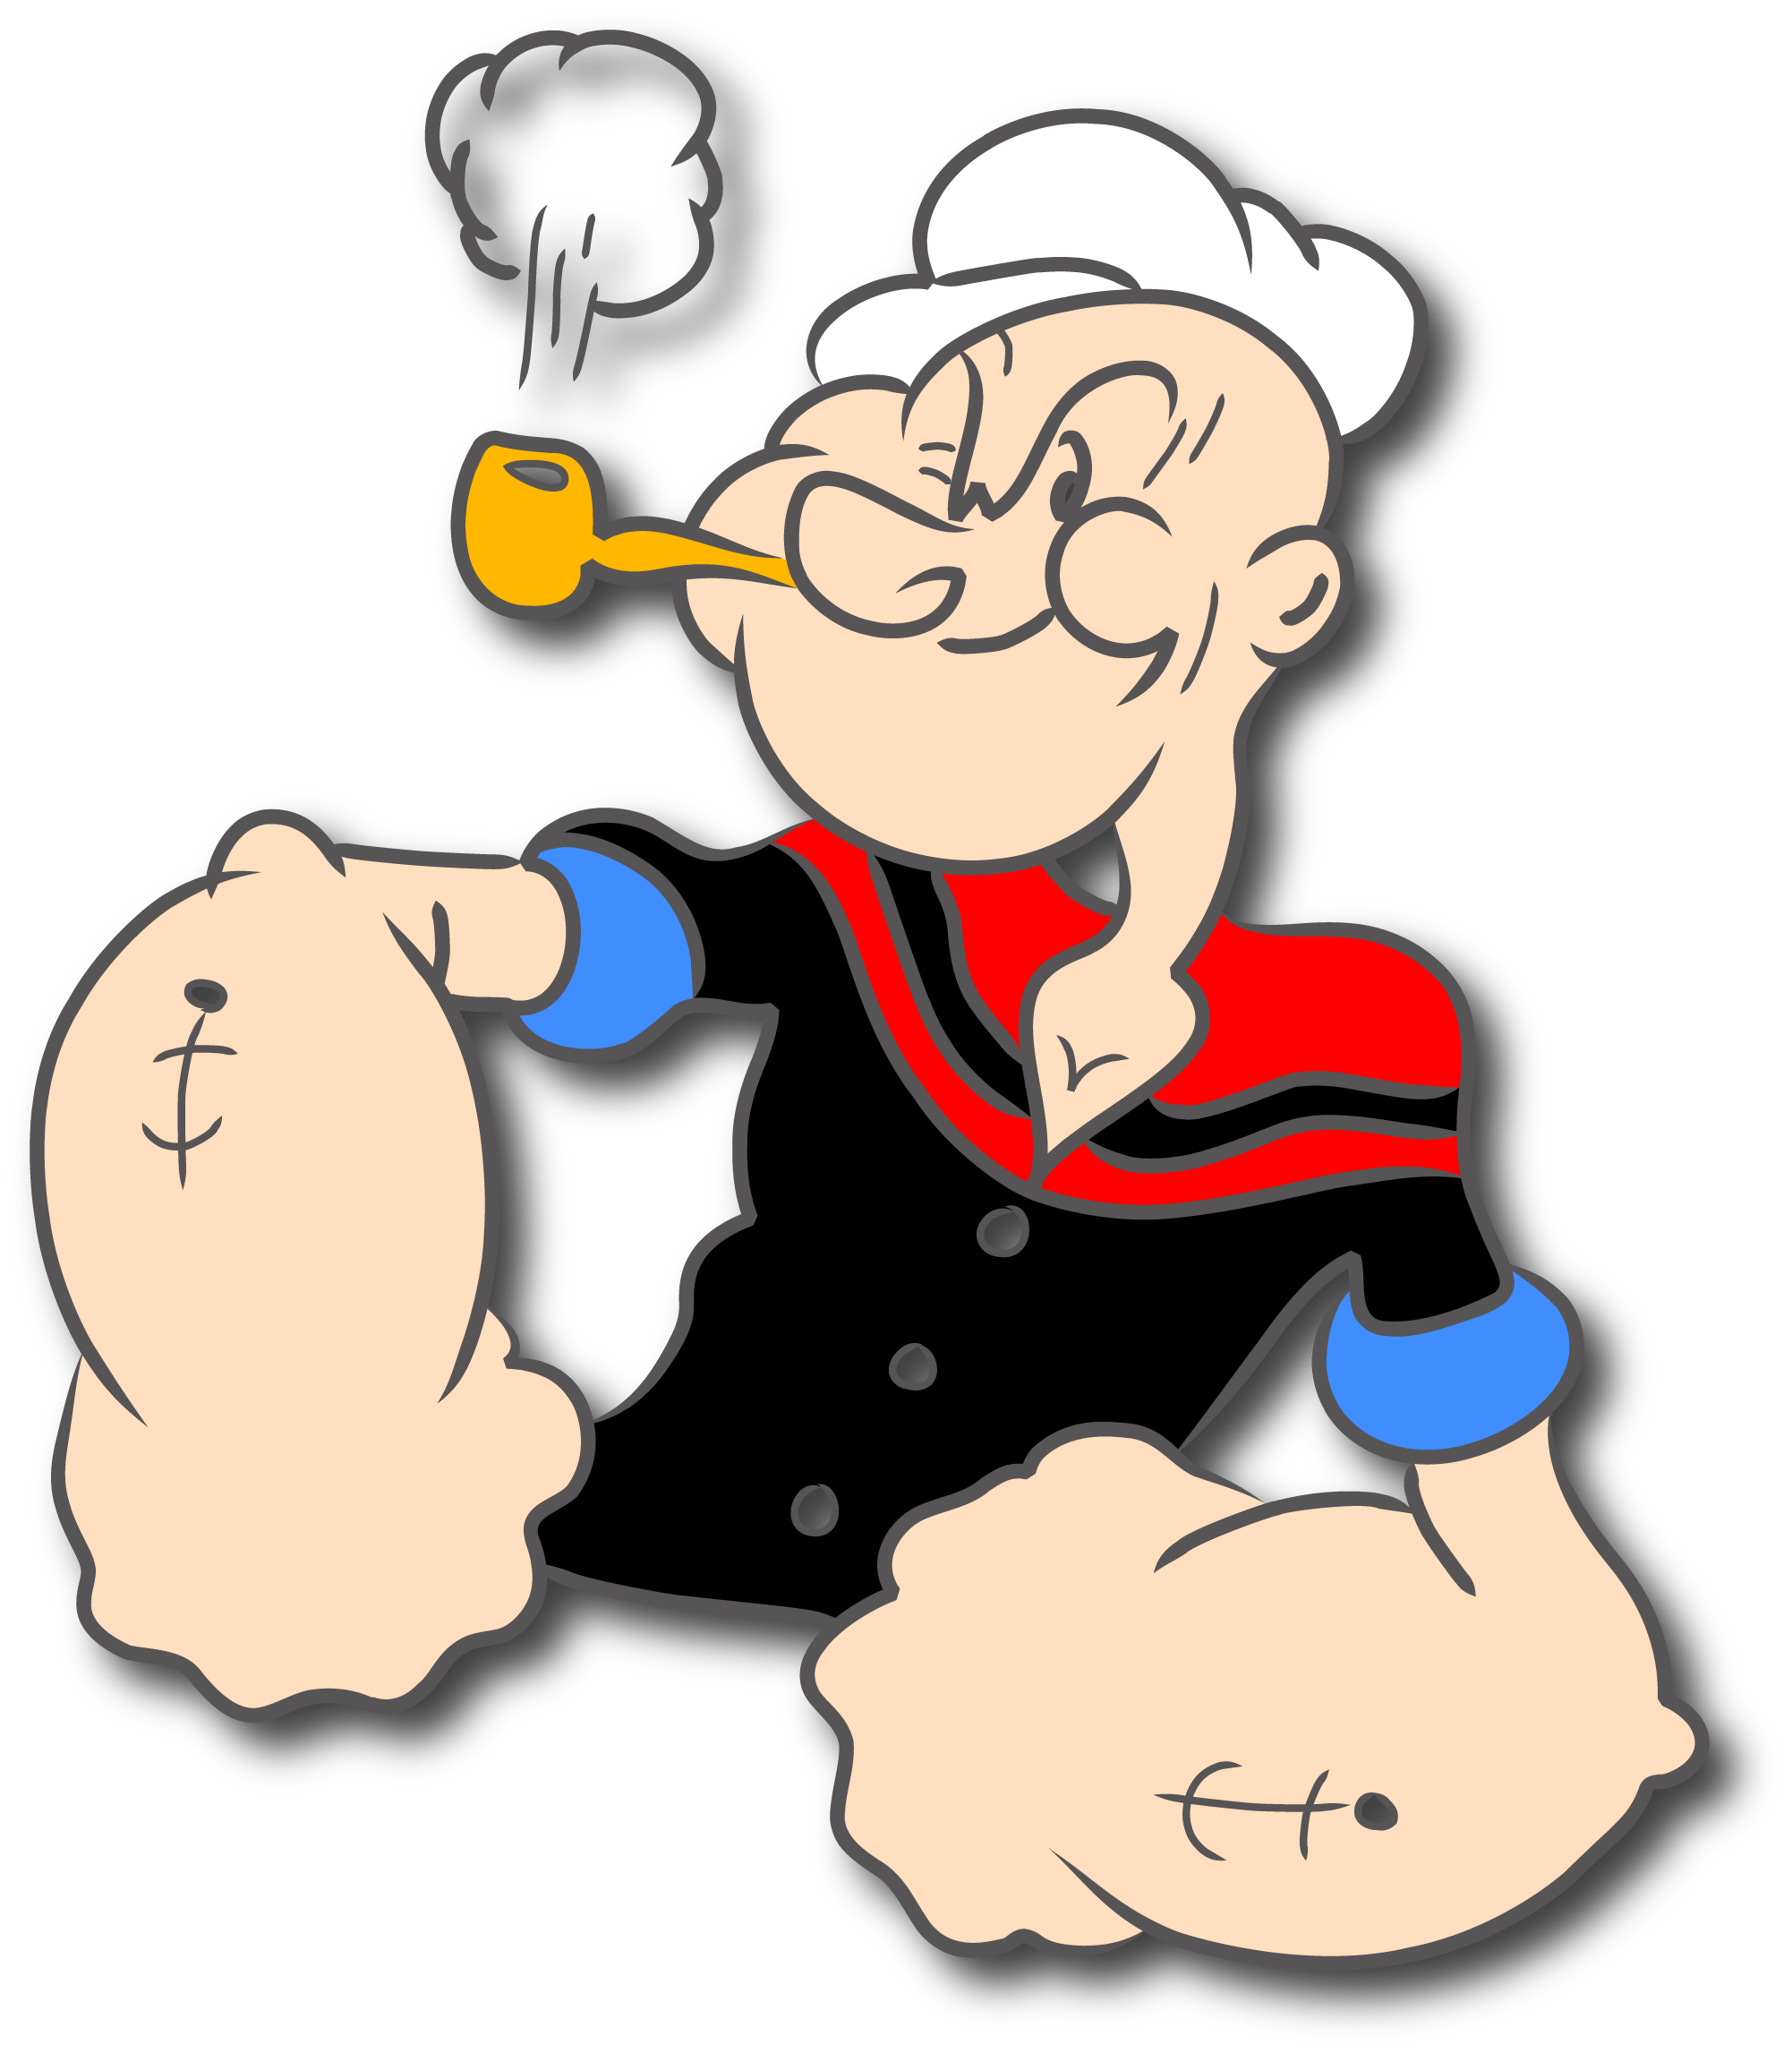 Popeye the Sailor Man meets Marvin the Martian | Mr. JtrFrankly's ...